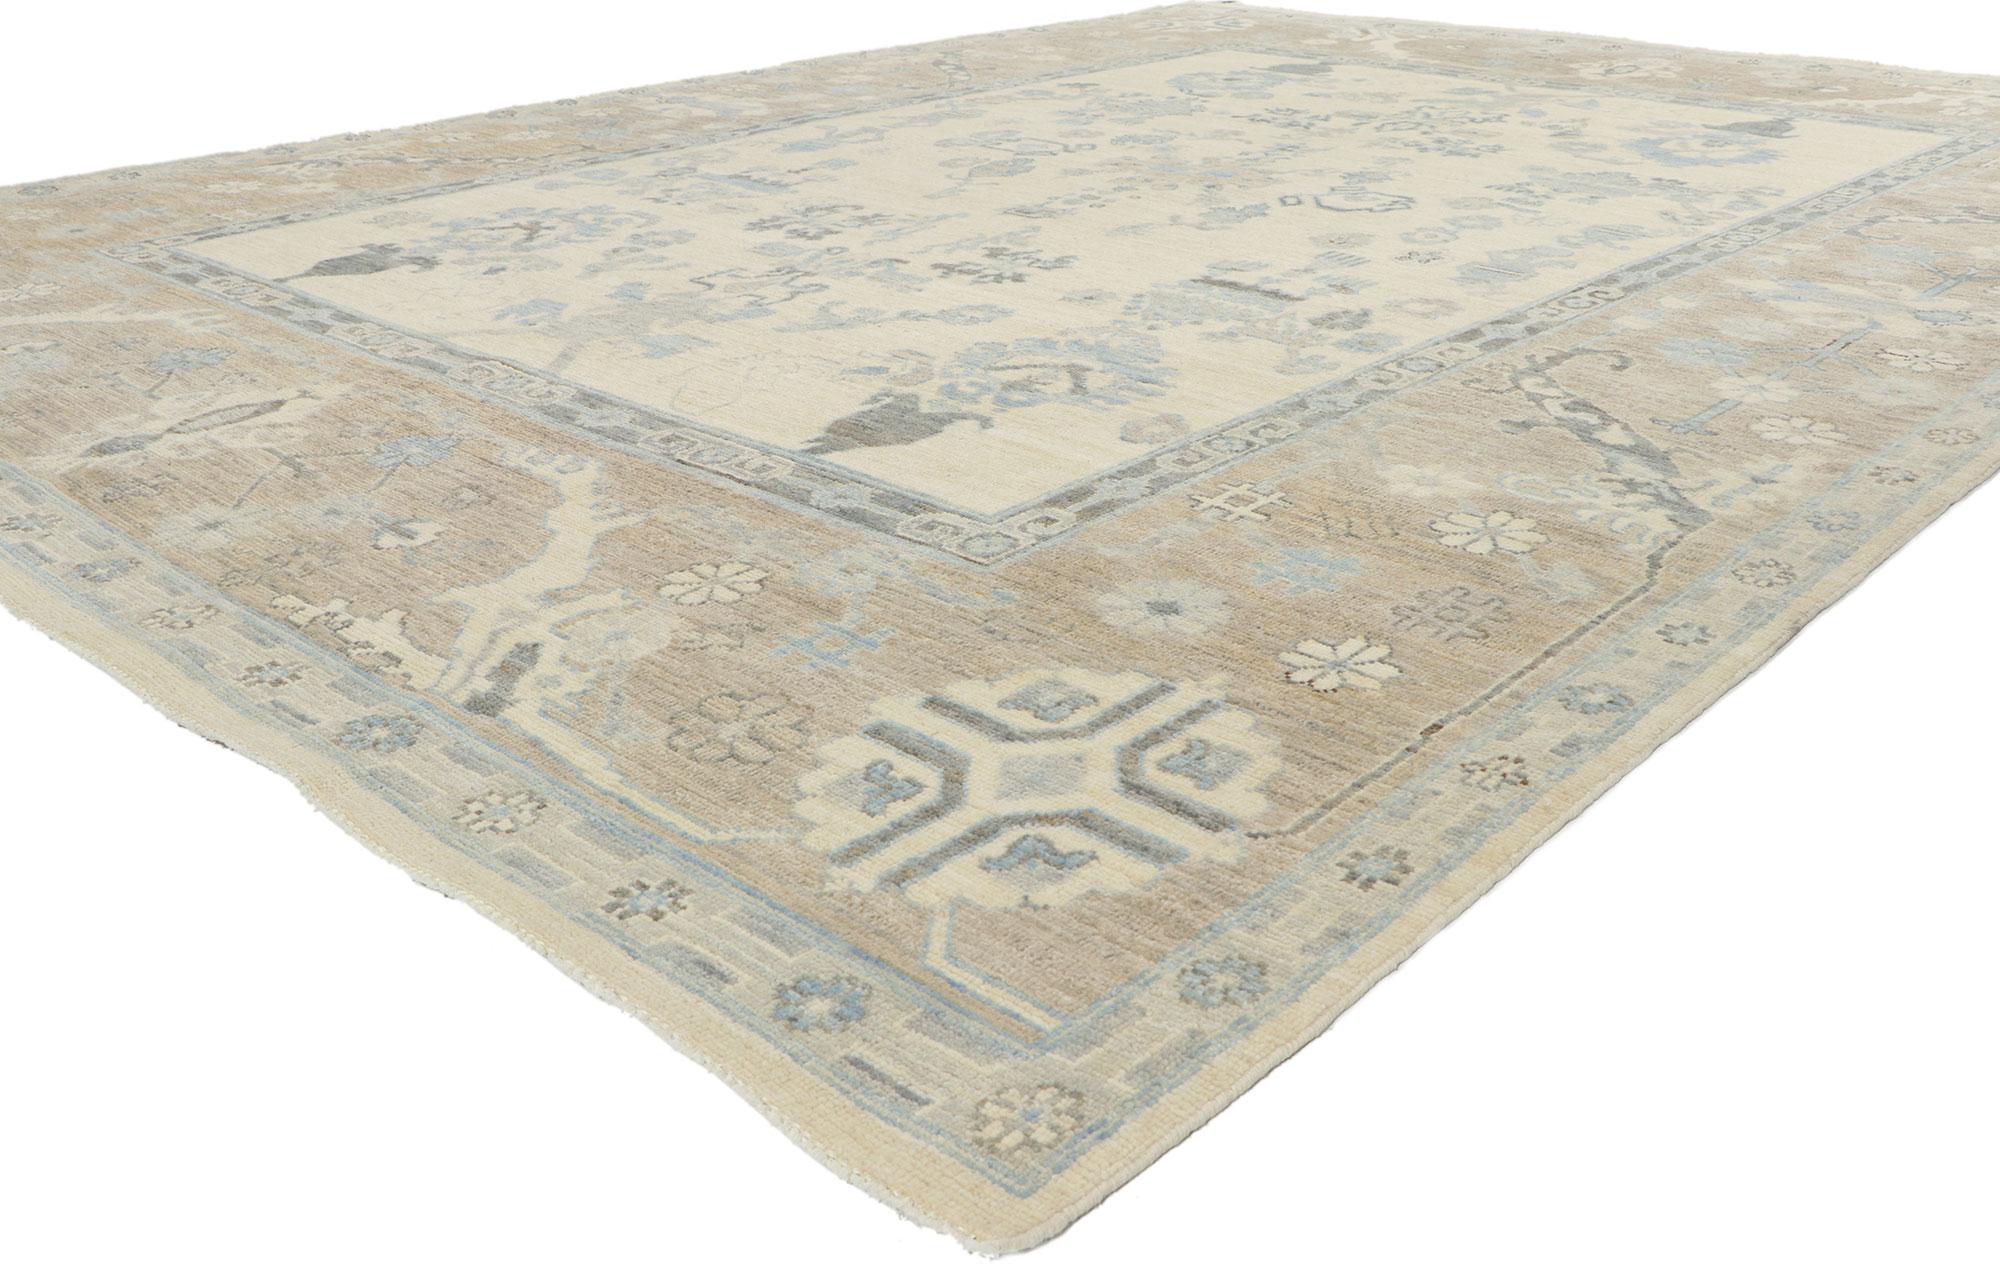 80908 New Contemporary oushak rug with Modern Traditional style, 08'10 x 11'08.